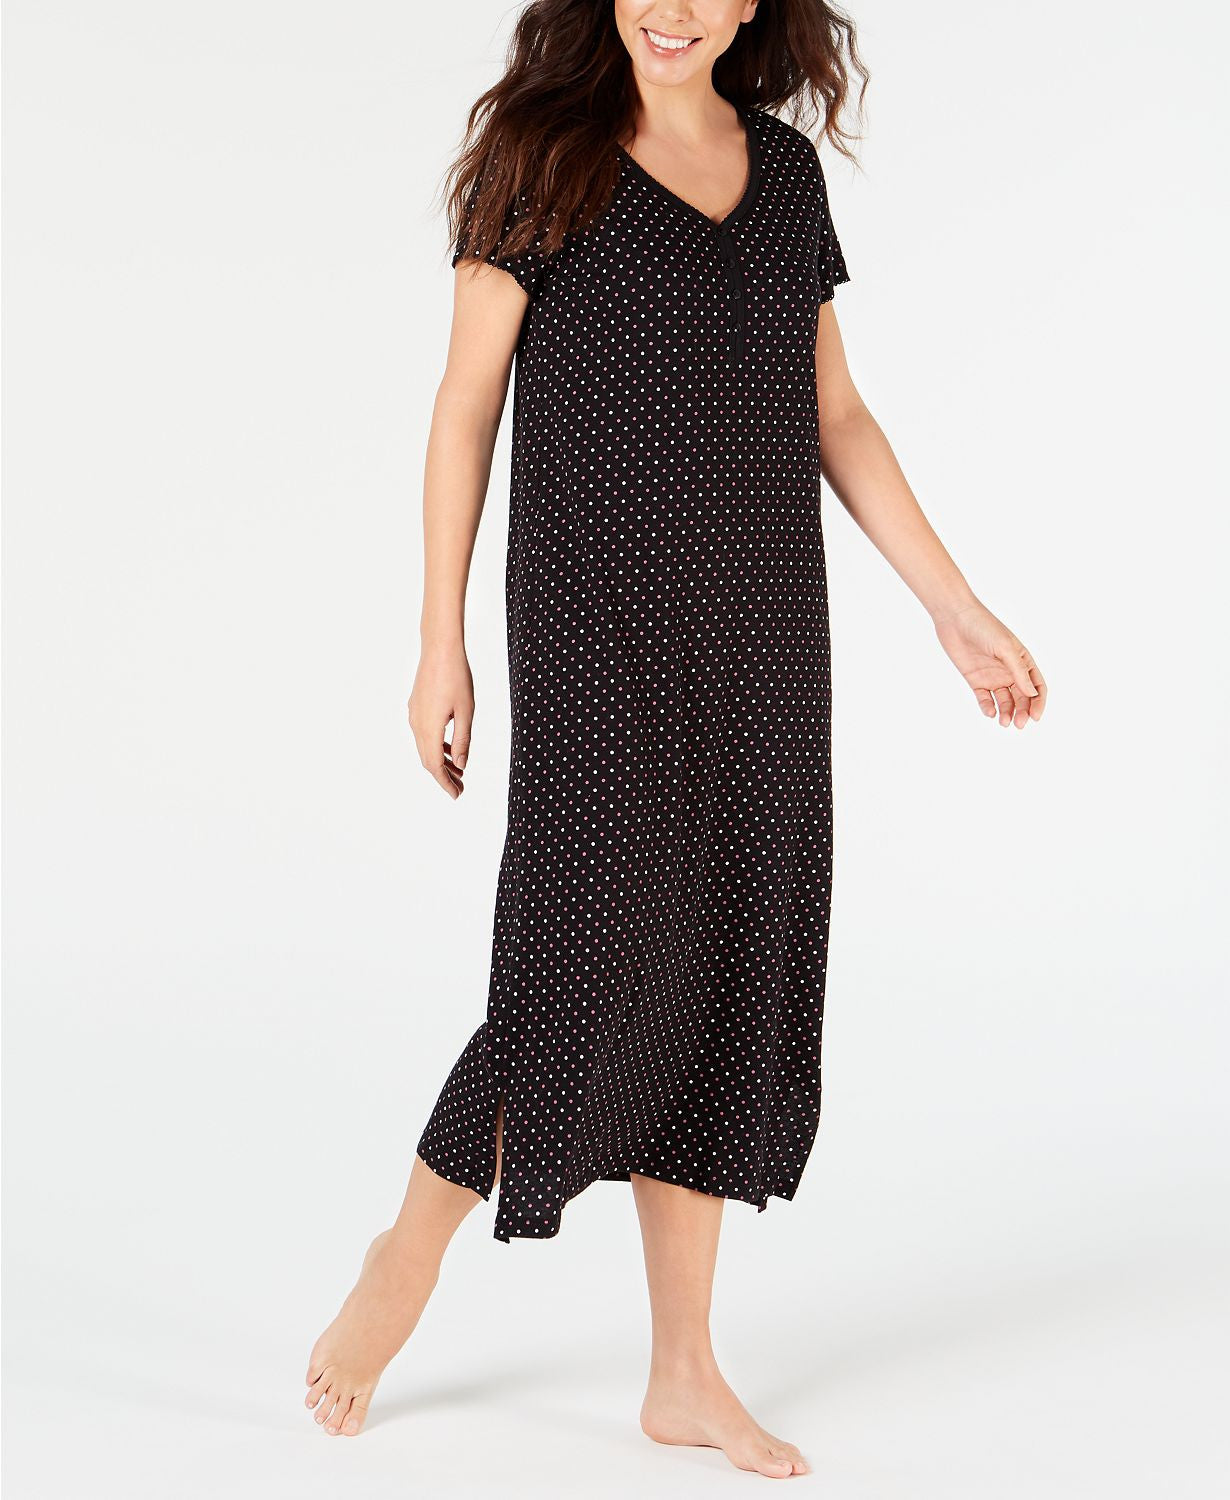 Charter Club Intimates Printed Soft Knit Cotton Nightgown in Black Duo Dot